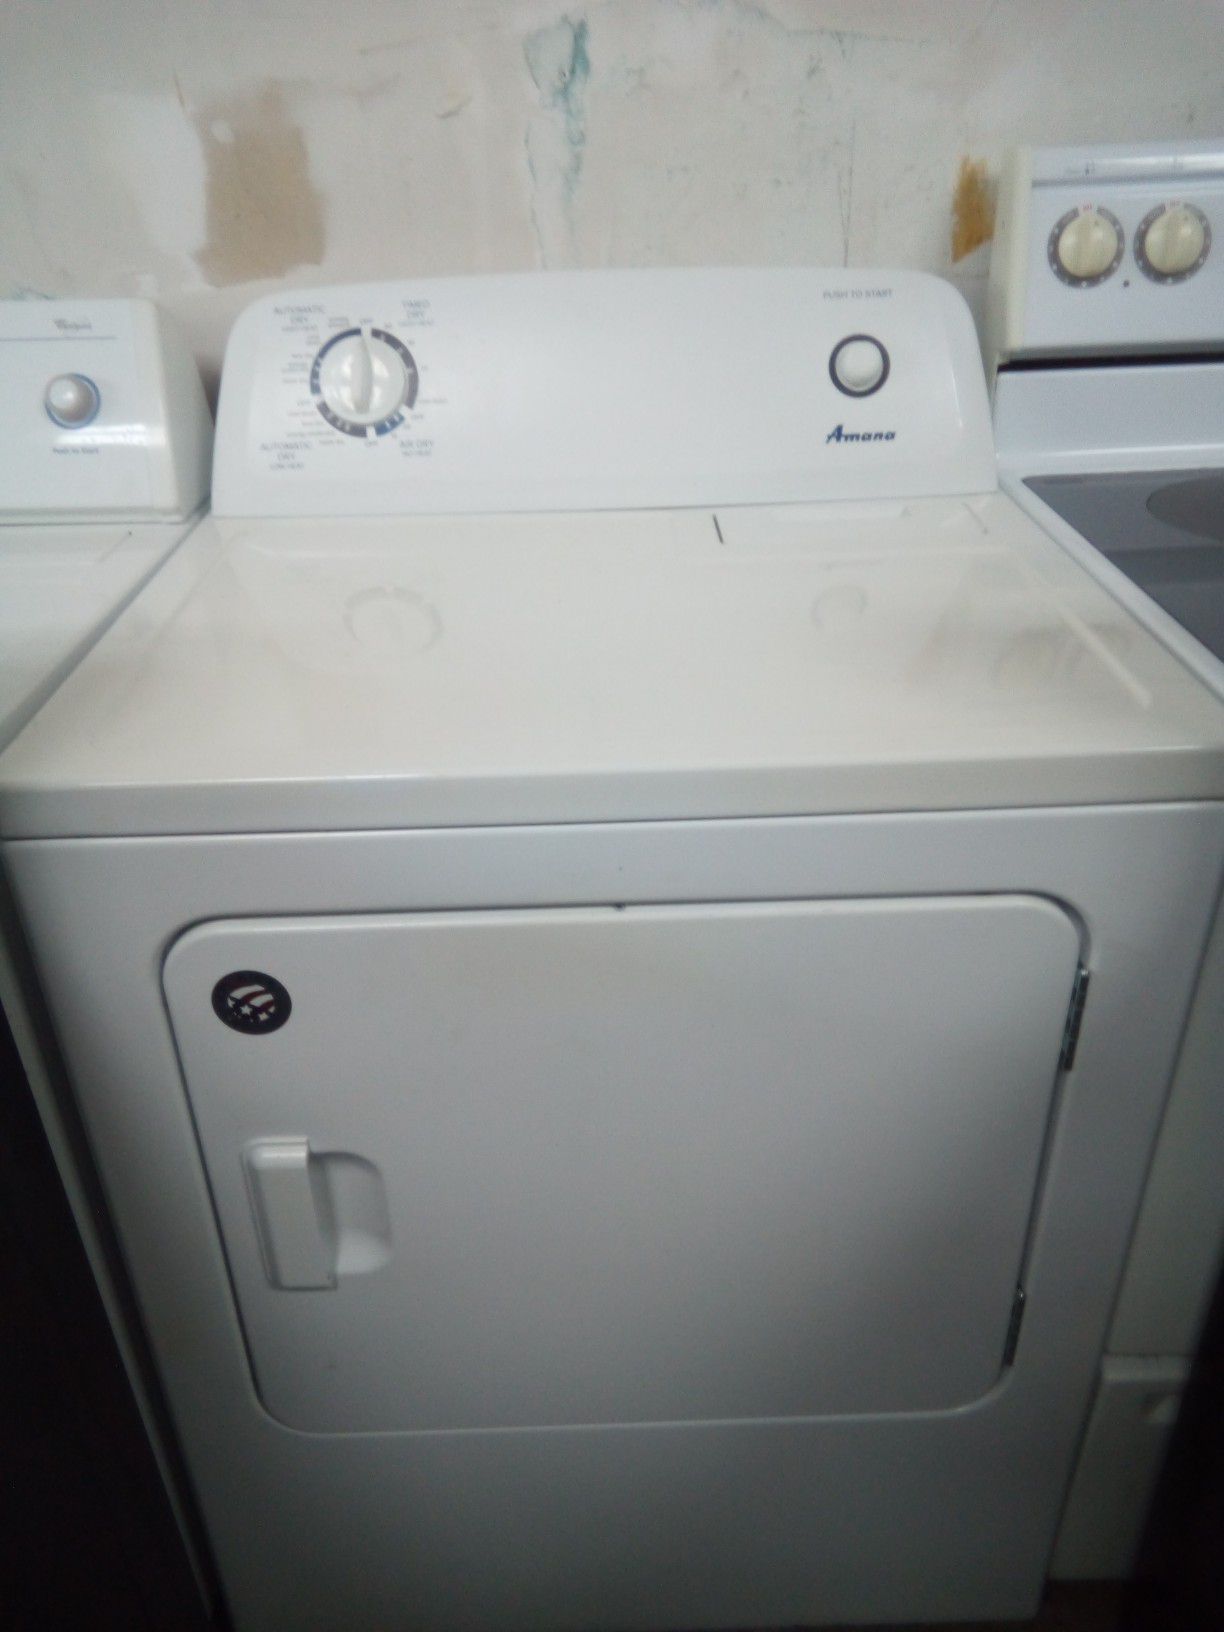 Dryer perfect condition